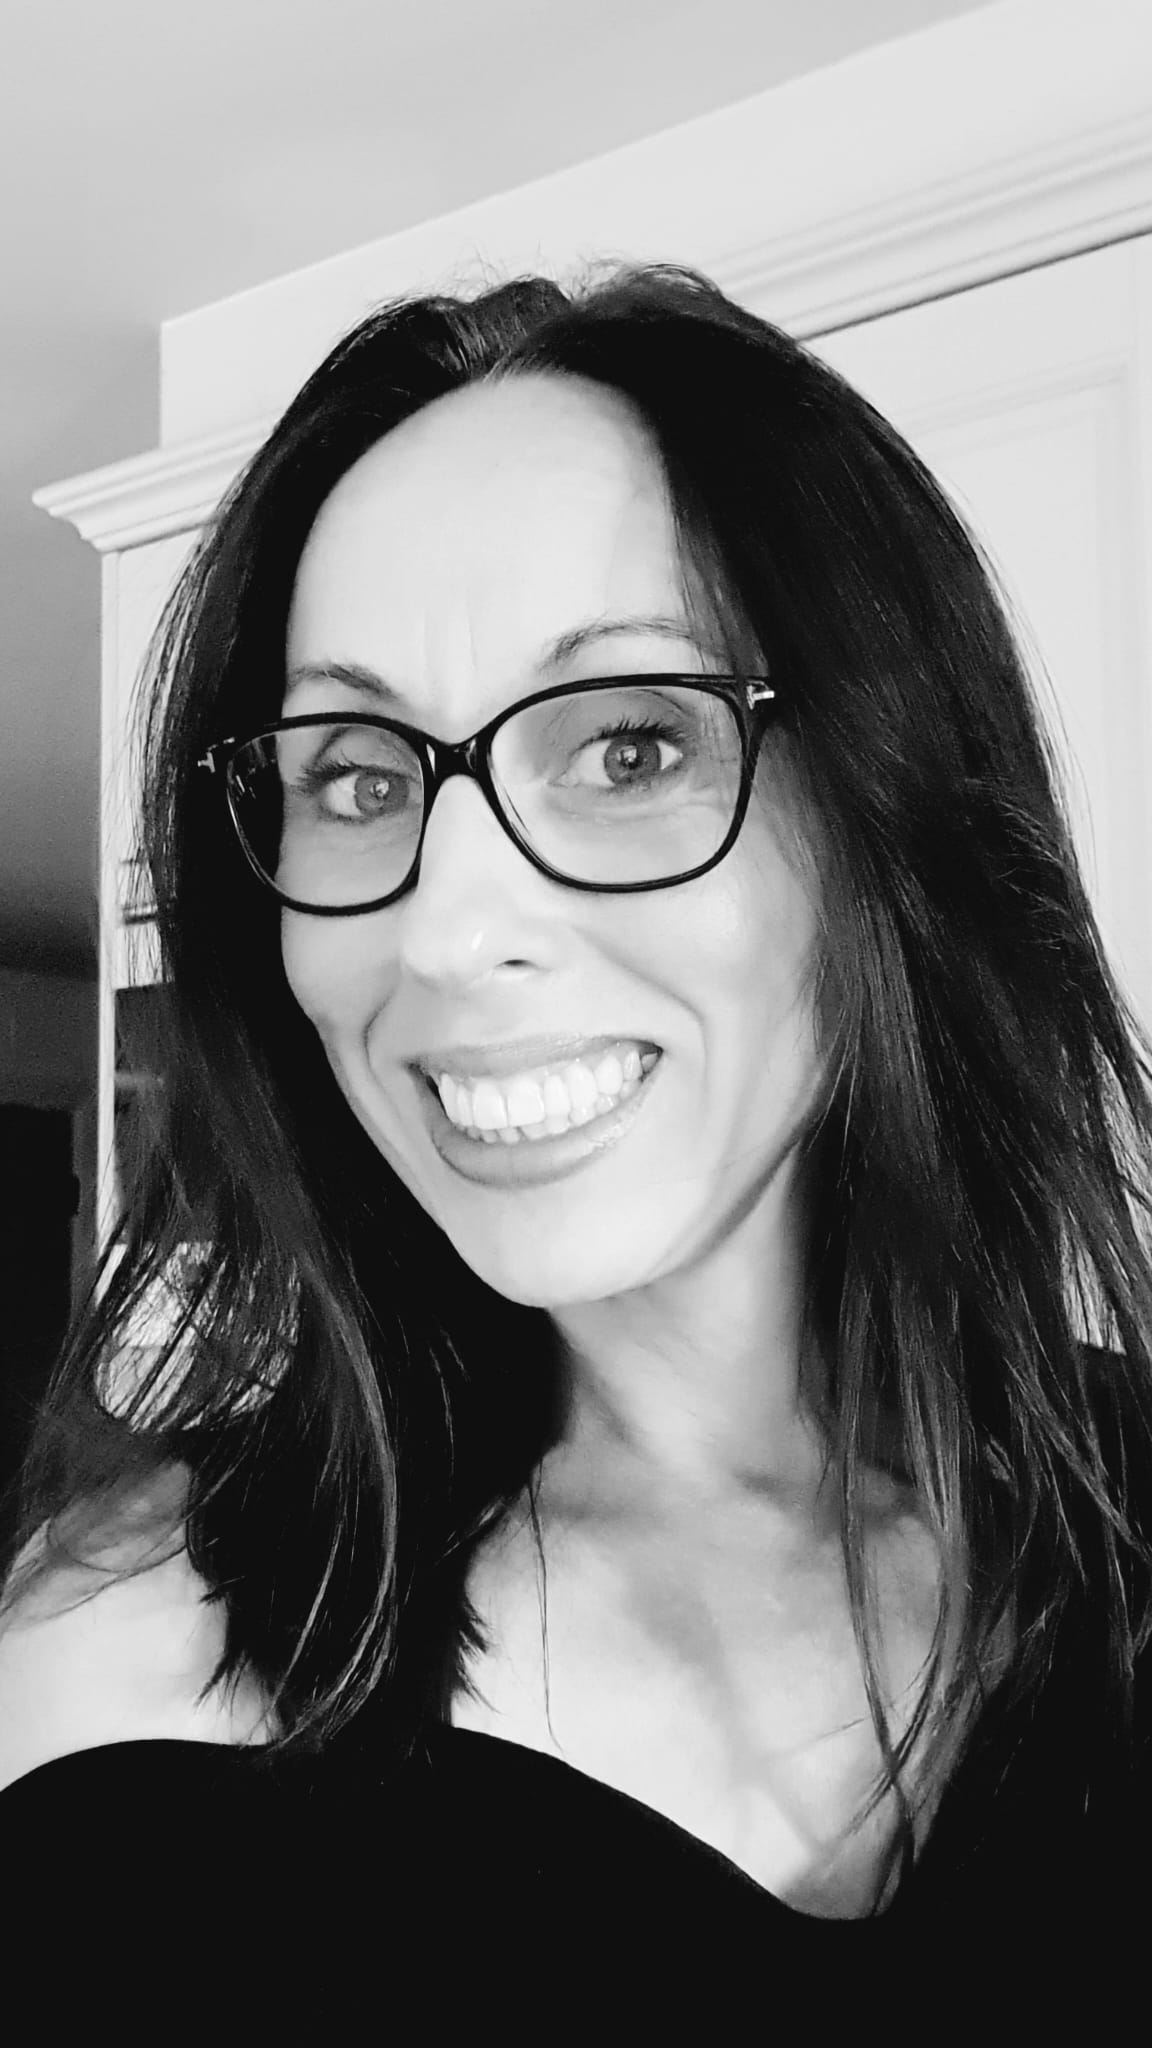 A black and white selfie of a white woman with dark shoulder length hair and large black glasses.